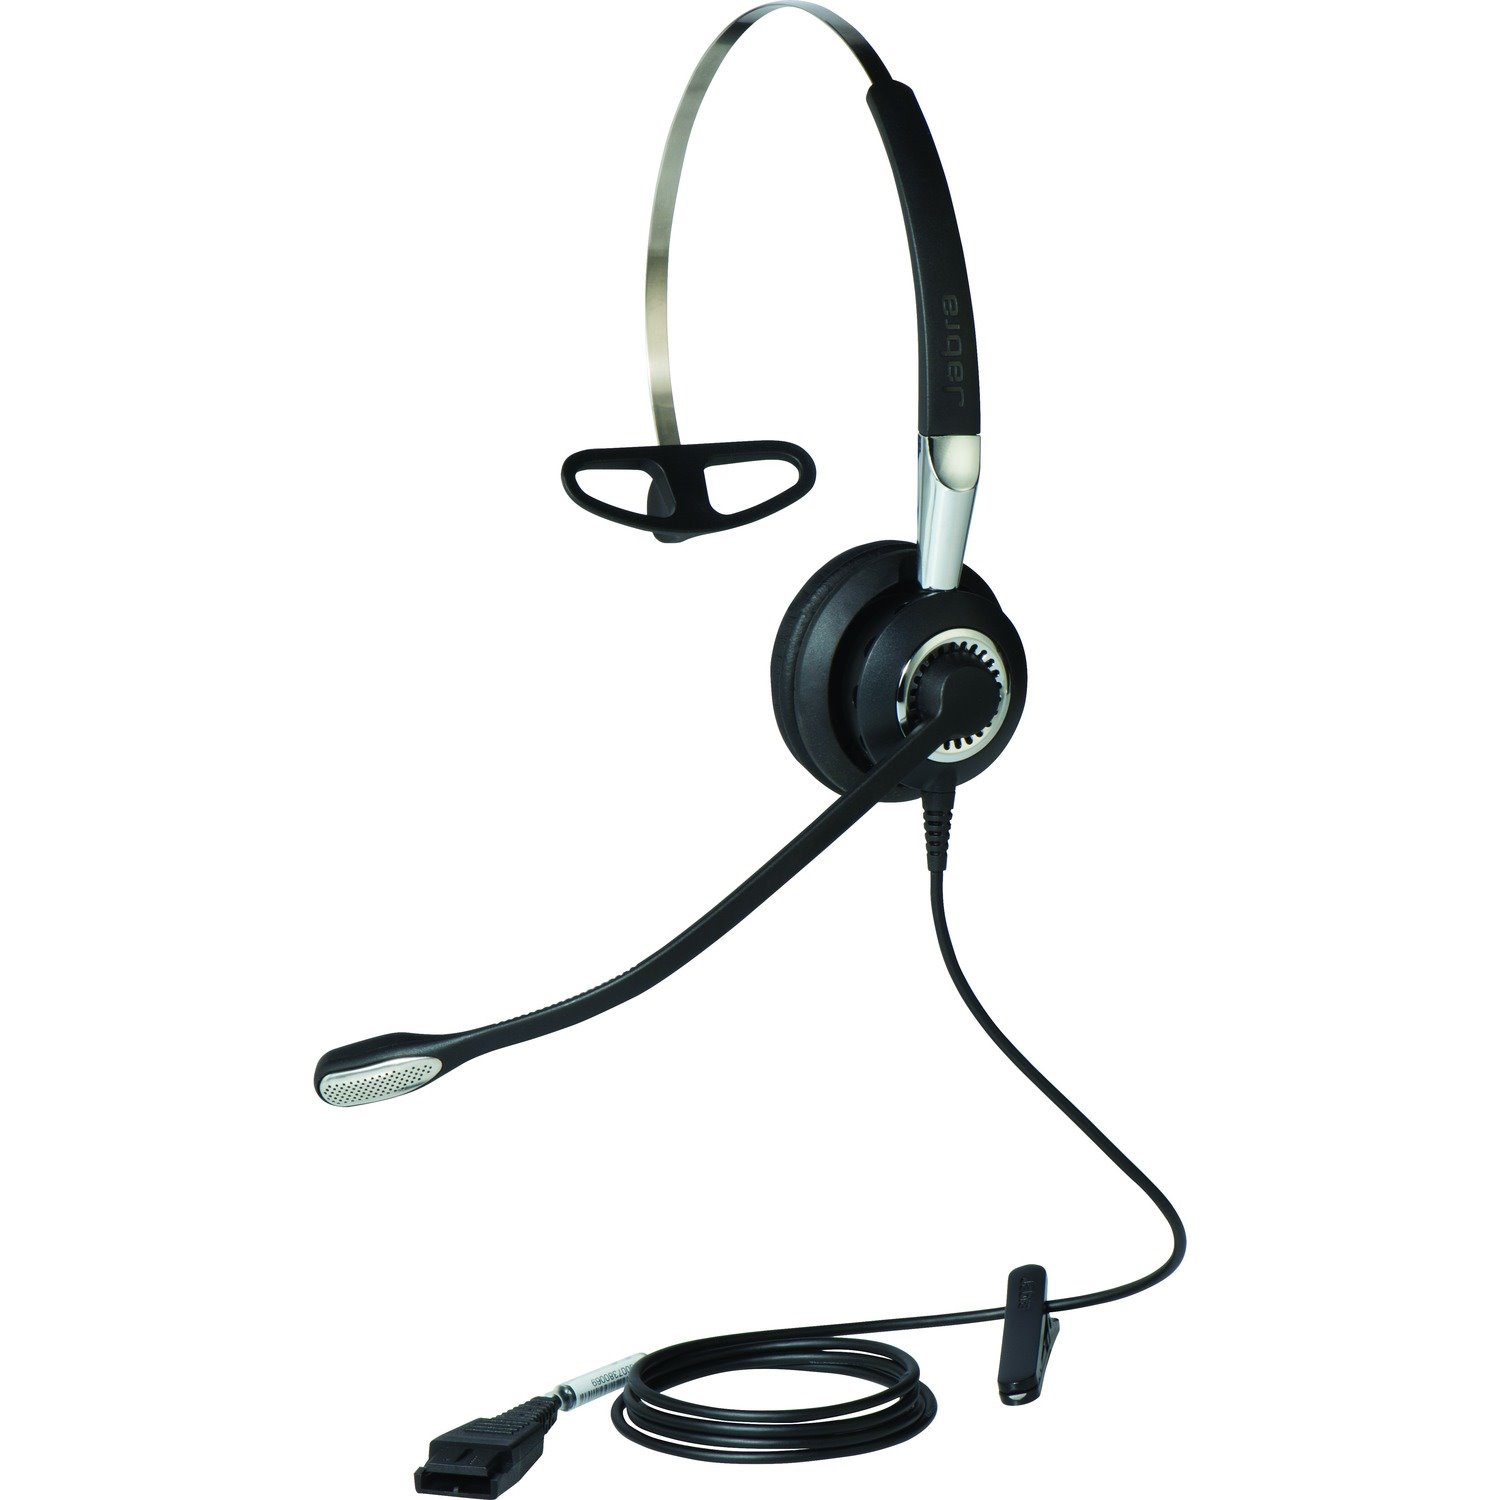 Jabra BIZ 2400 II QD Wired Over-the-head, Behind-the-neck, Over-the-ear Mono Headset